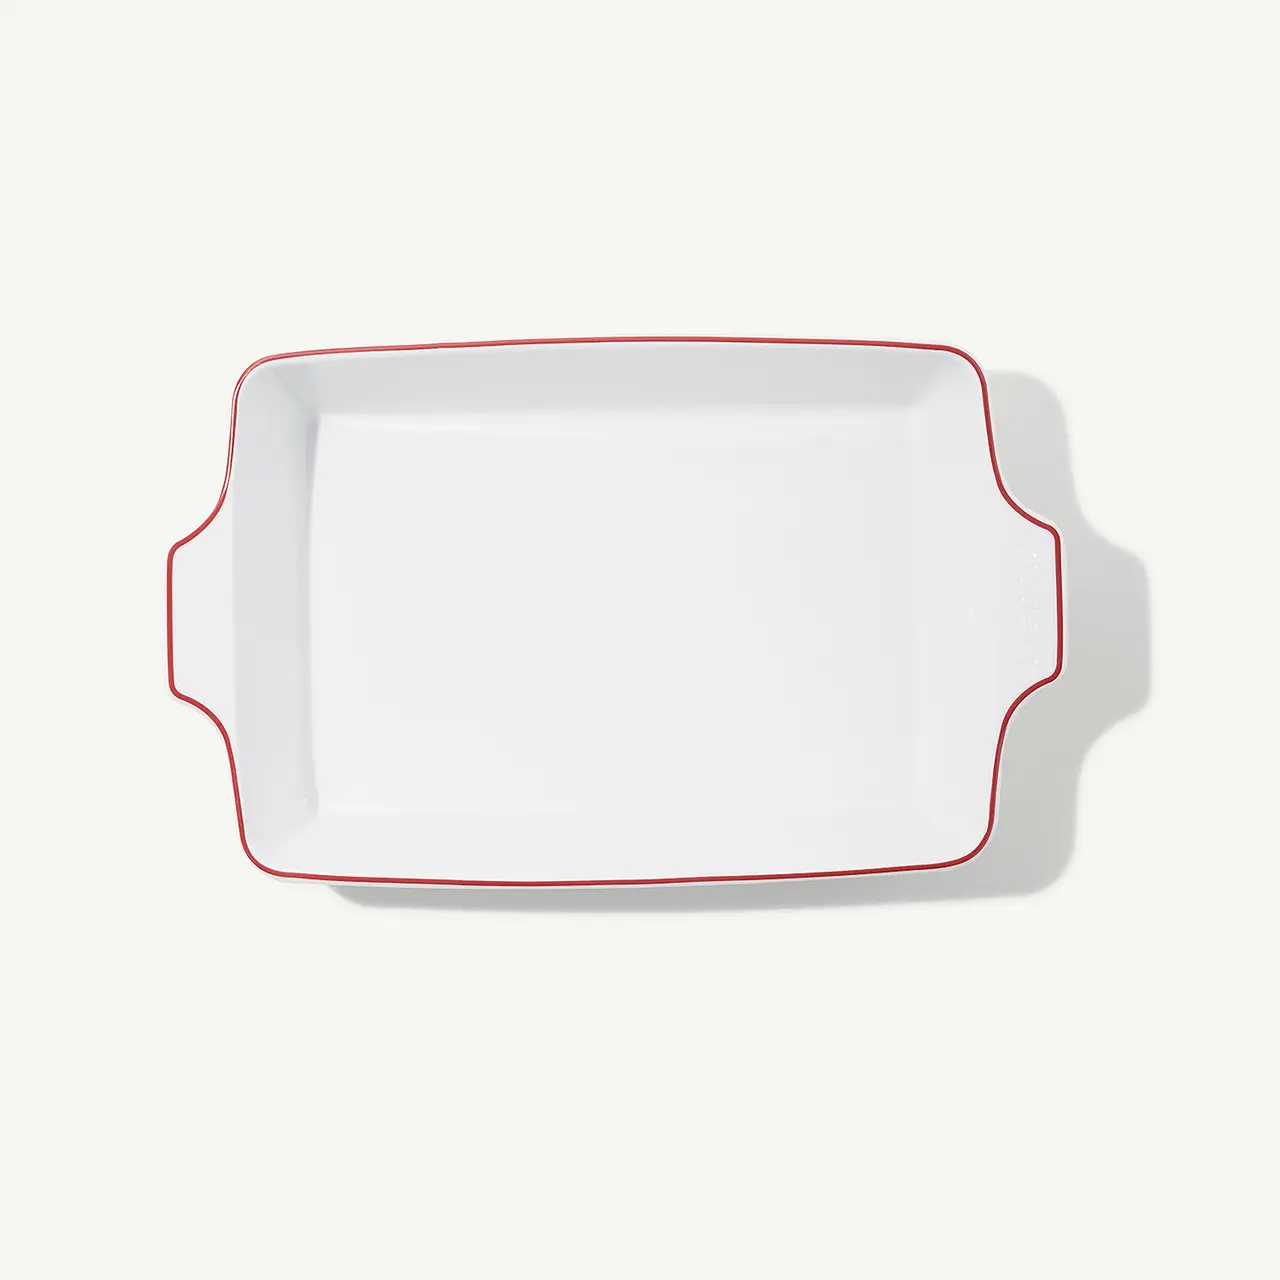 A white rectangular serving platter with scalloped edges and a red outline sits against a solid background.